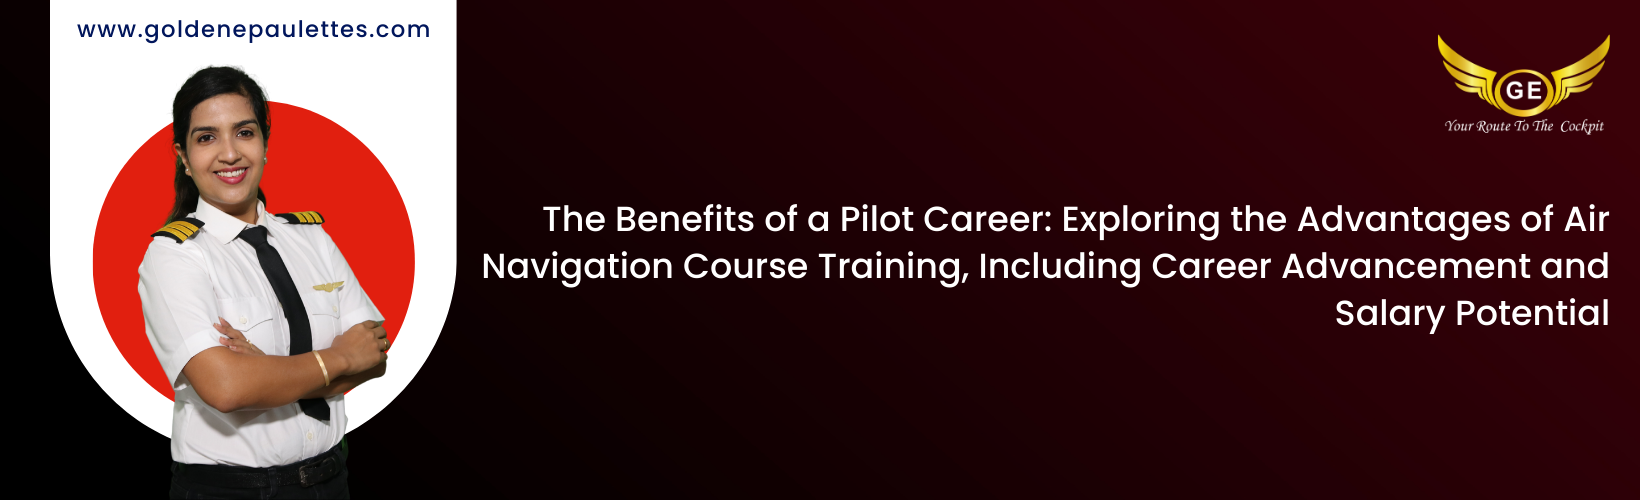 Pilot Career Paths After Completing an Air Navigation Course